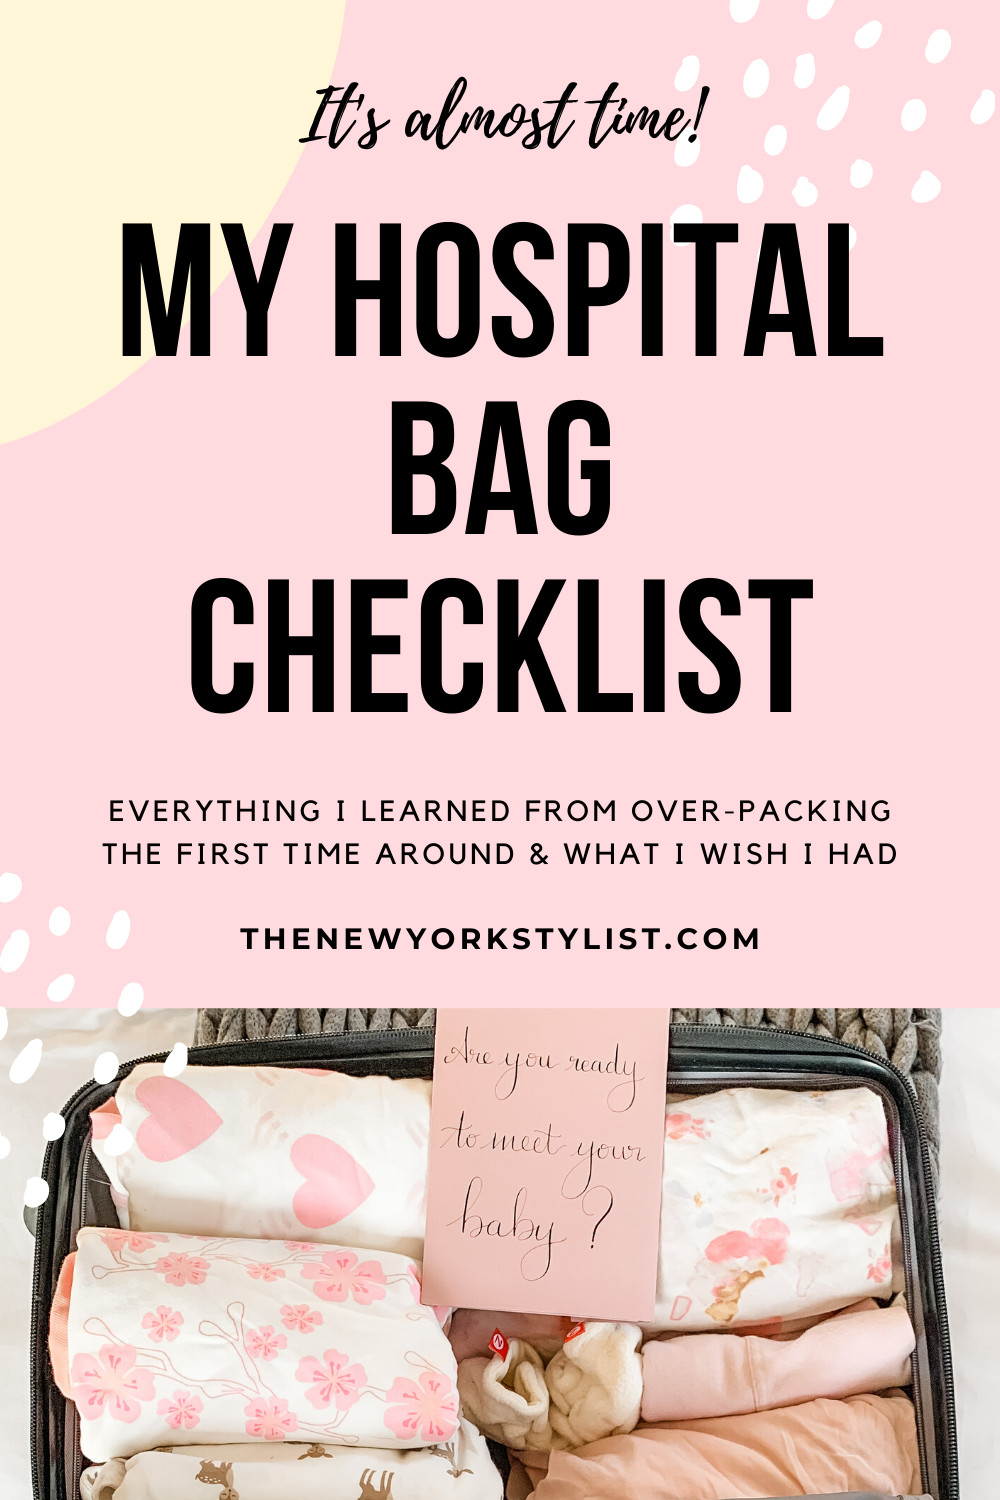 Hospital Diaper Bag Checklist: What to Pack - Monica + Andy